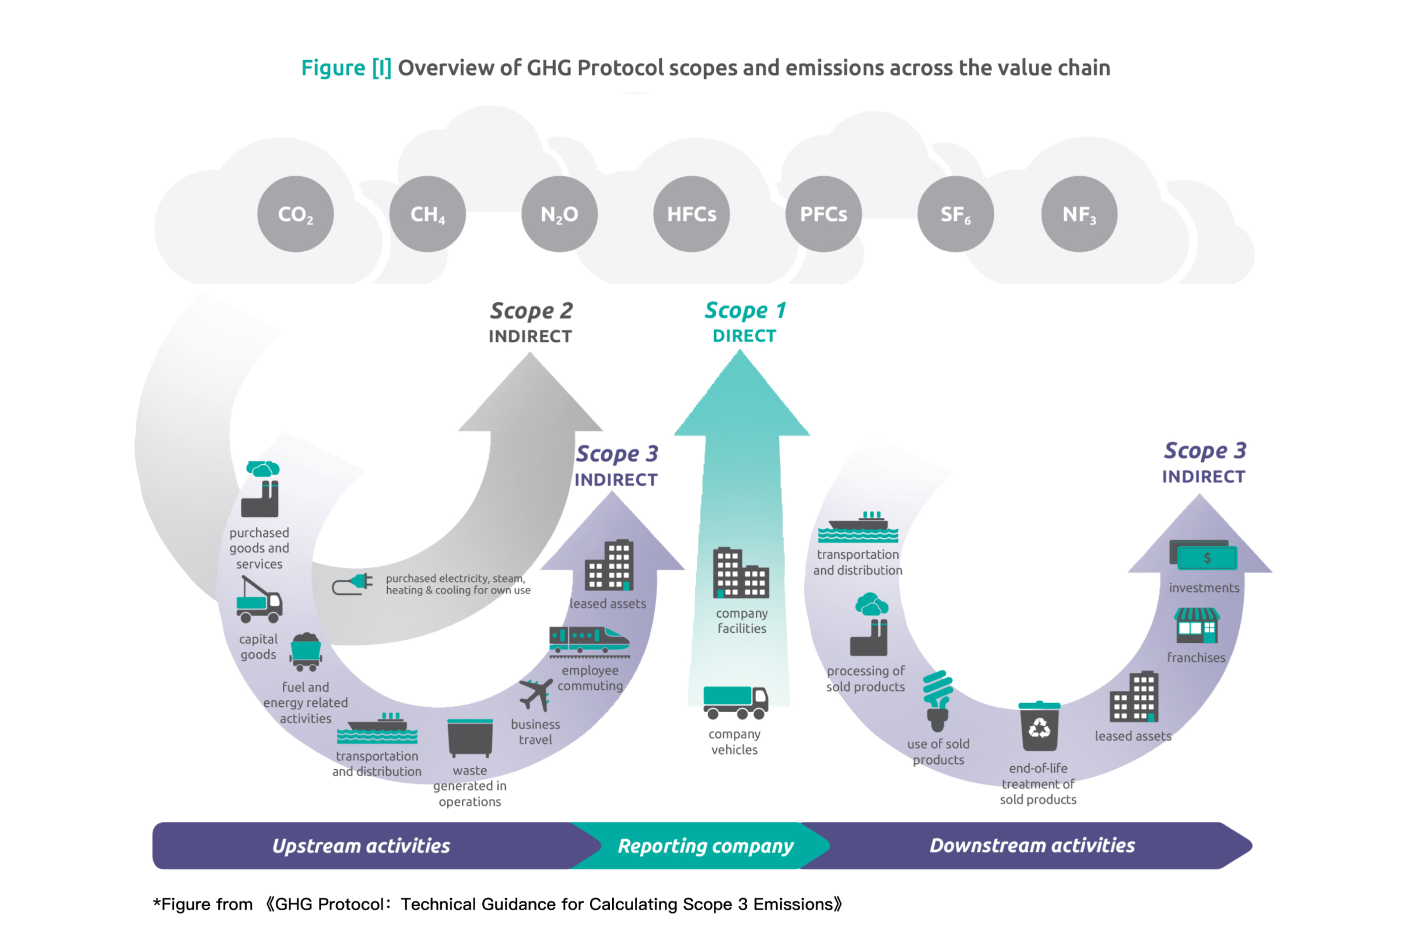 Figure: Overview of GHG Protocol scopes and emissions across the value chain